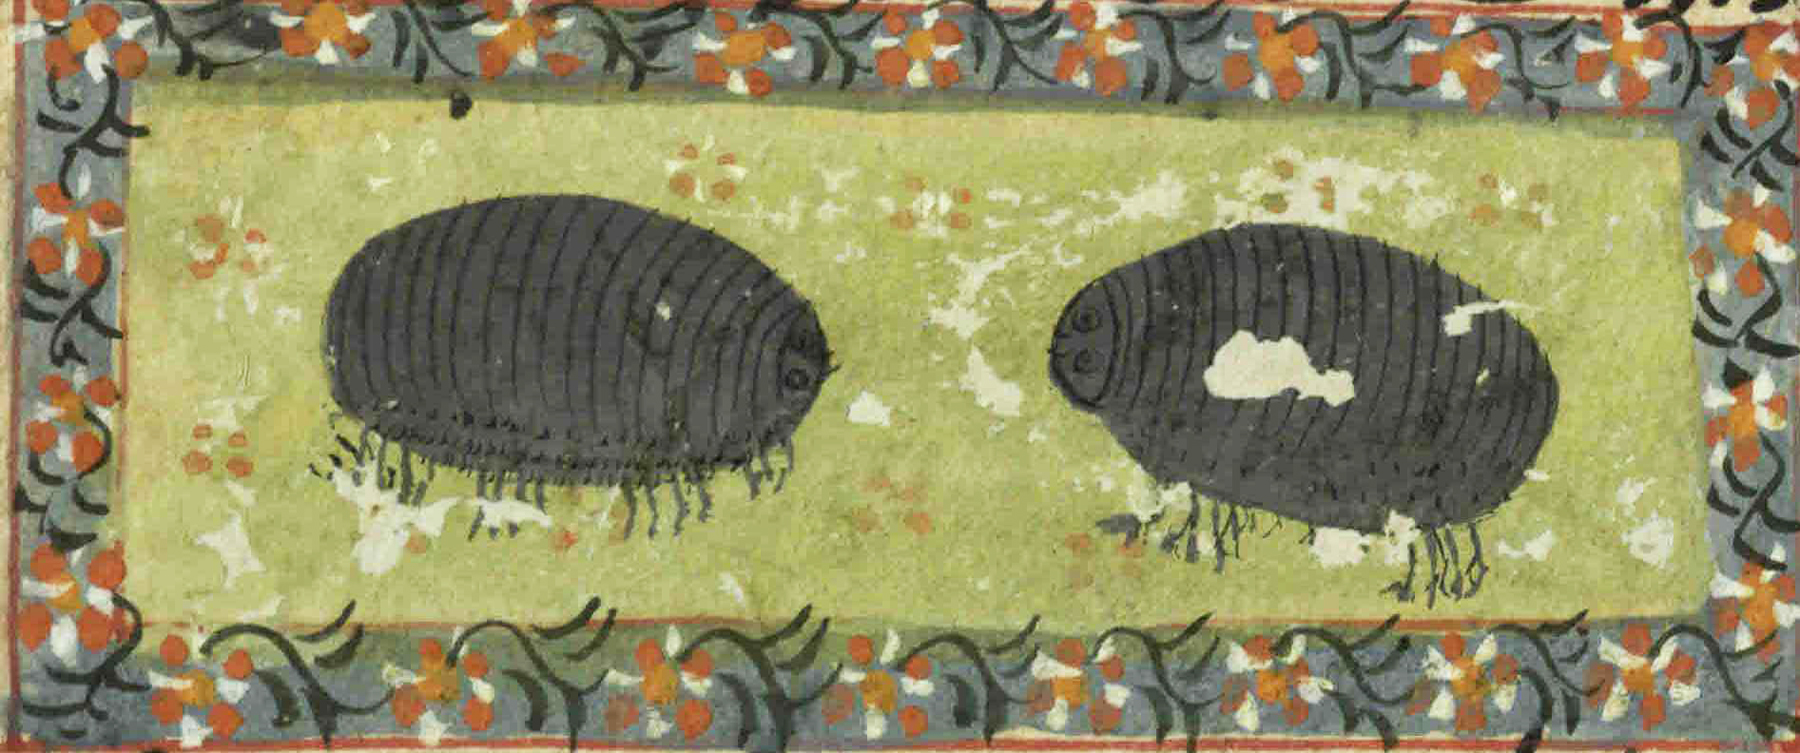 Woodlice from "The Book of Wonders of the Age” (St Andrews ms32(o))